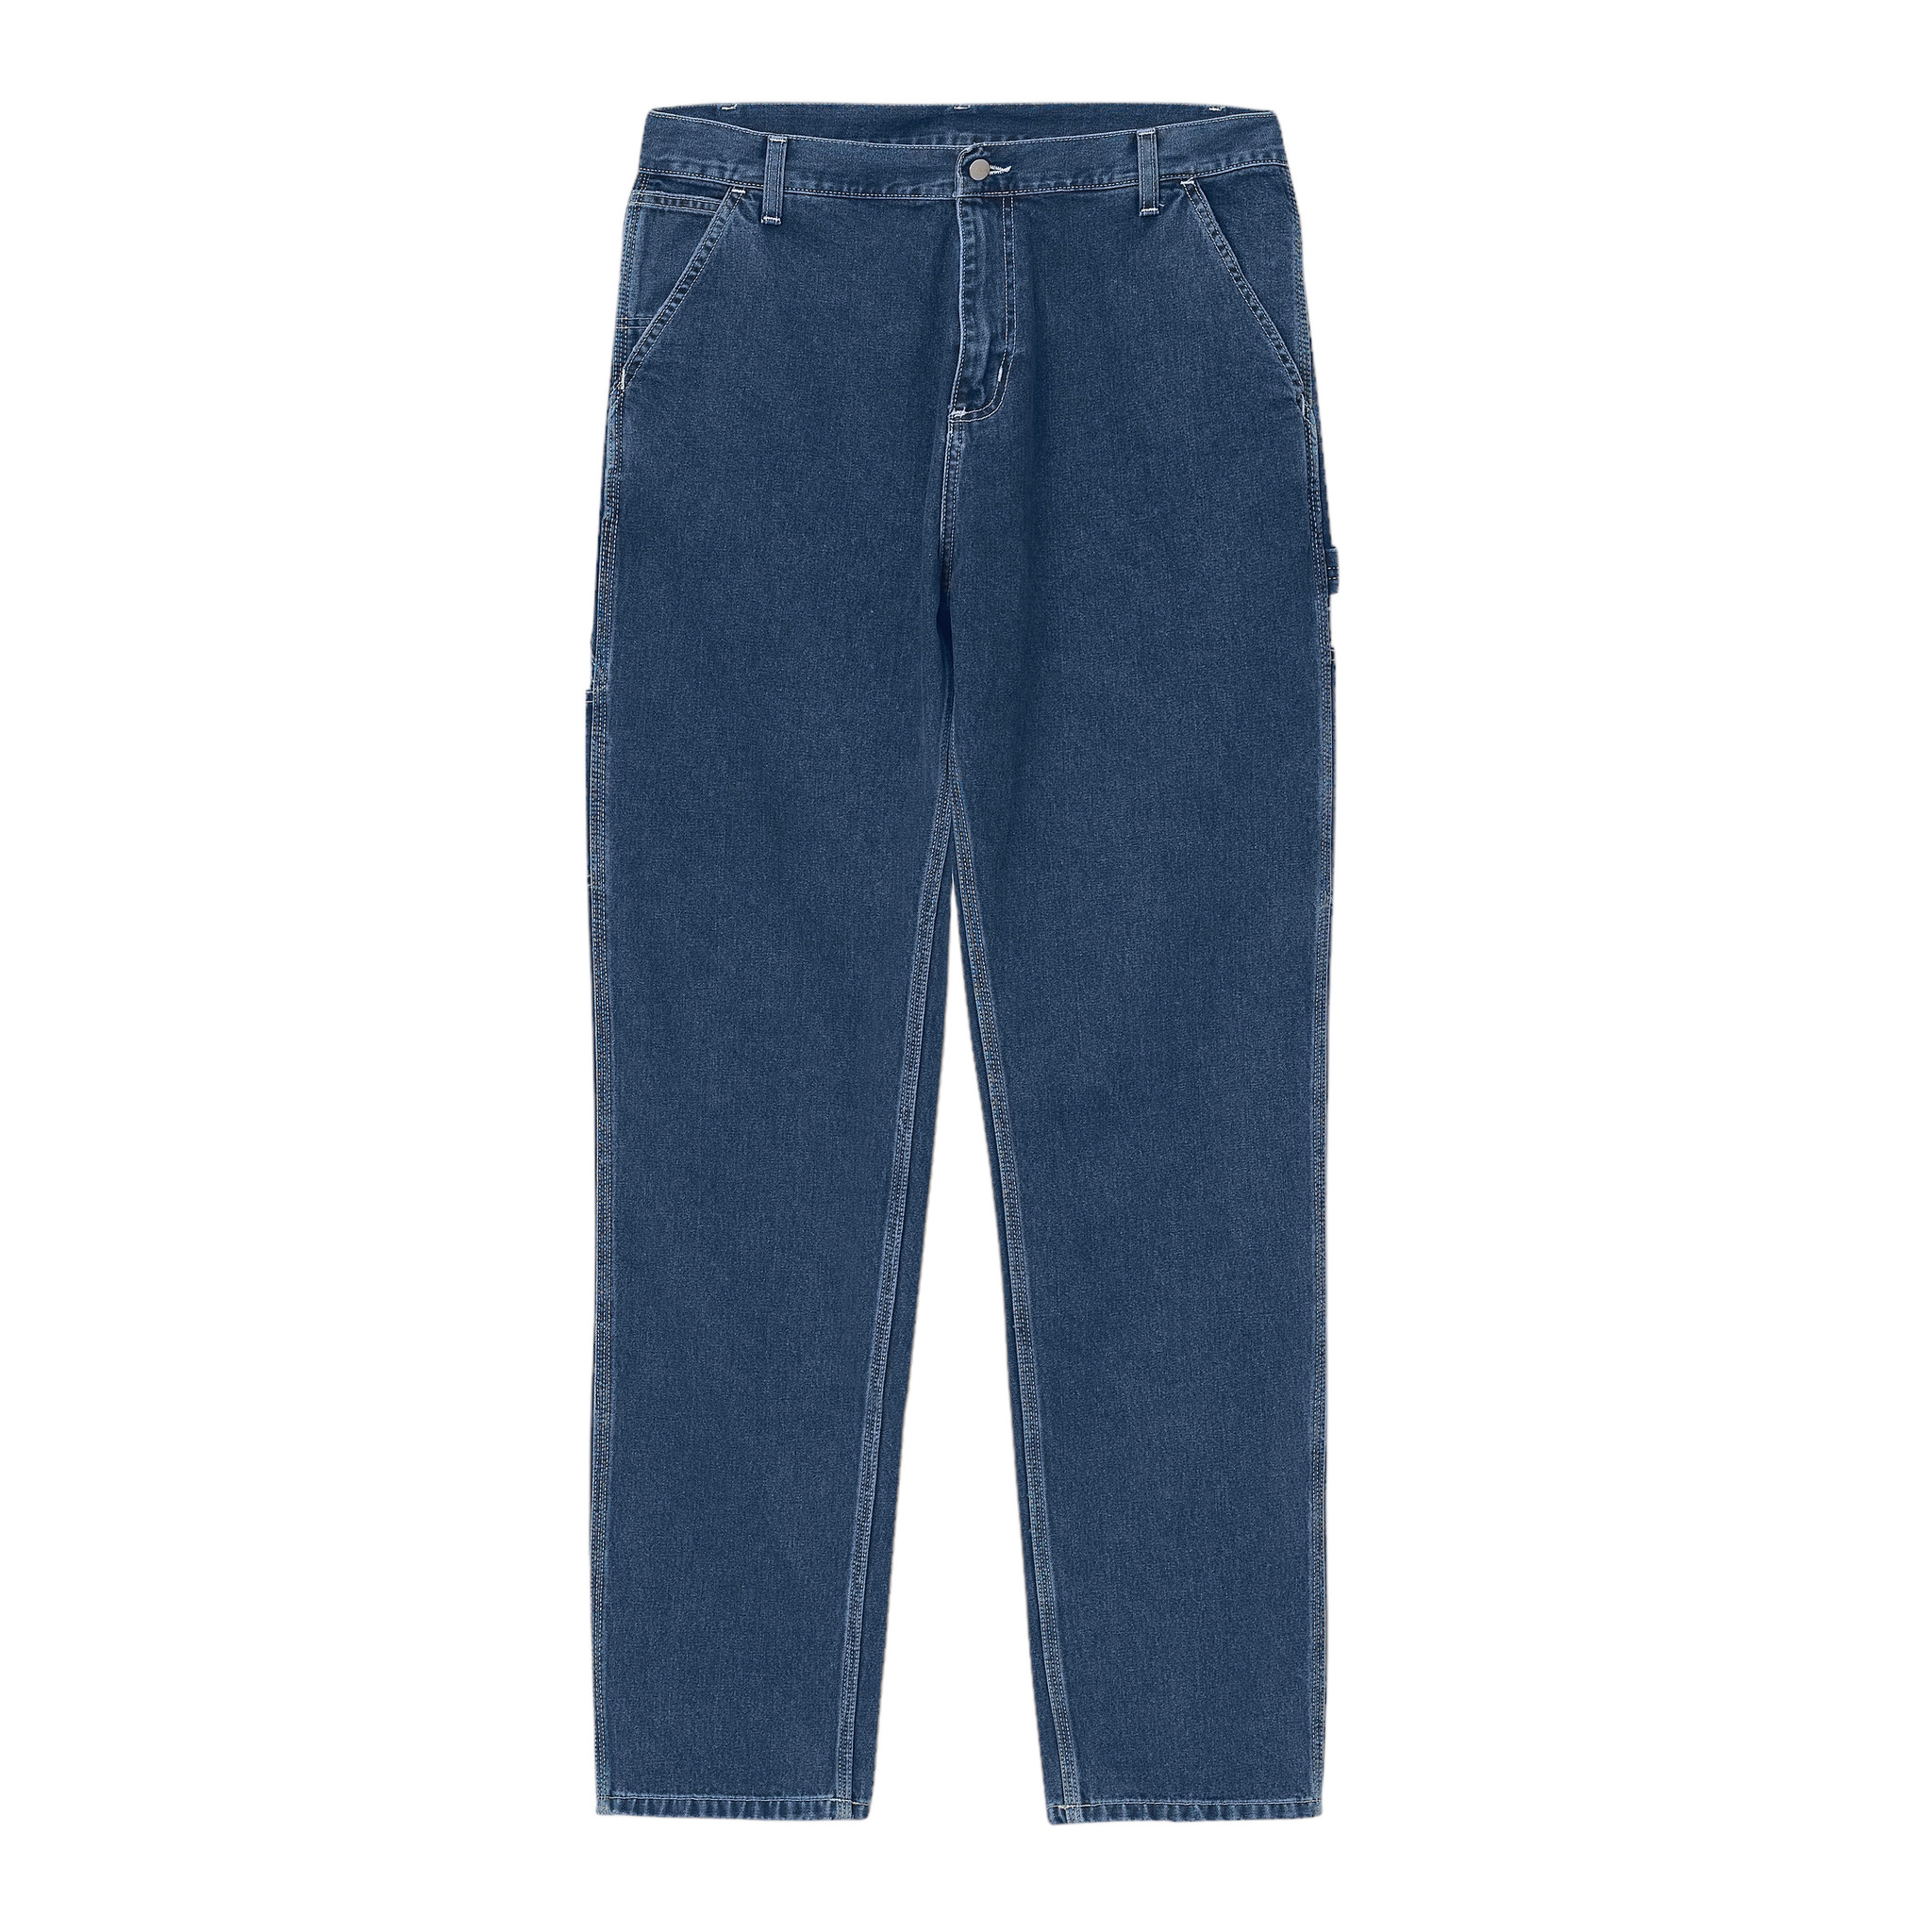 Carhartt Ruck Single Knee Pant - Blue Stoned Washed